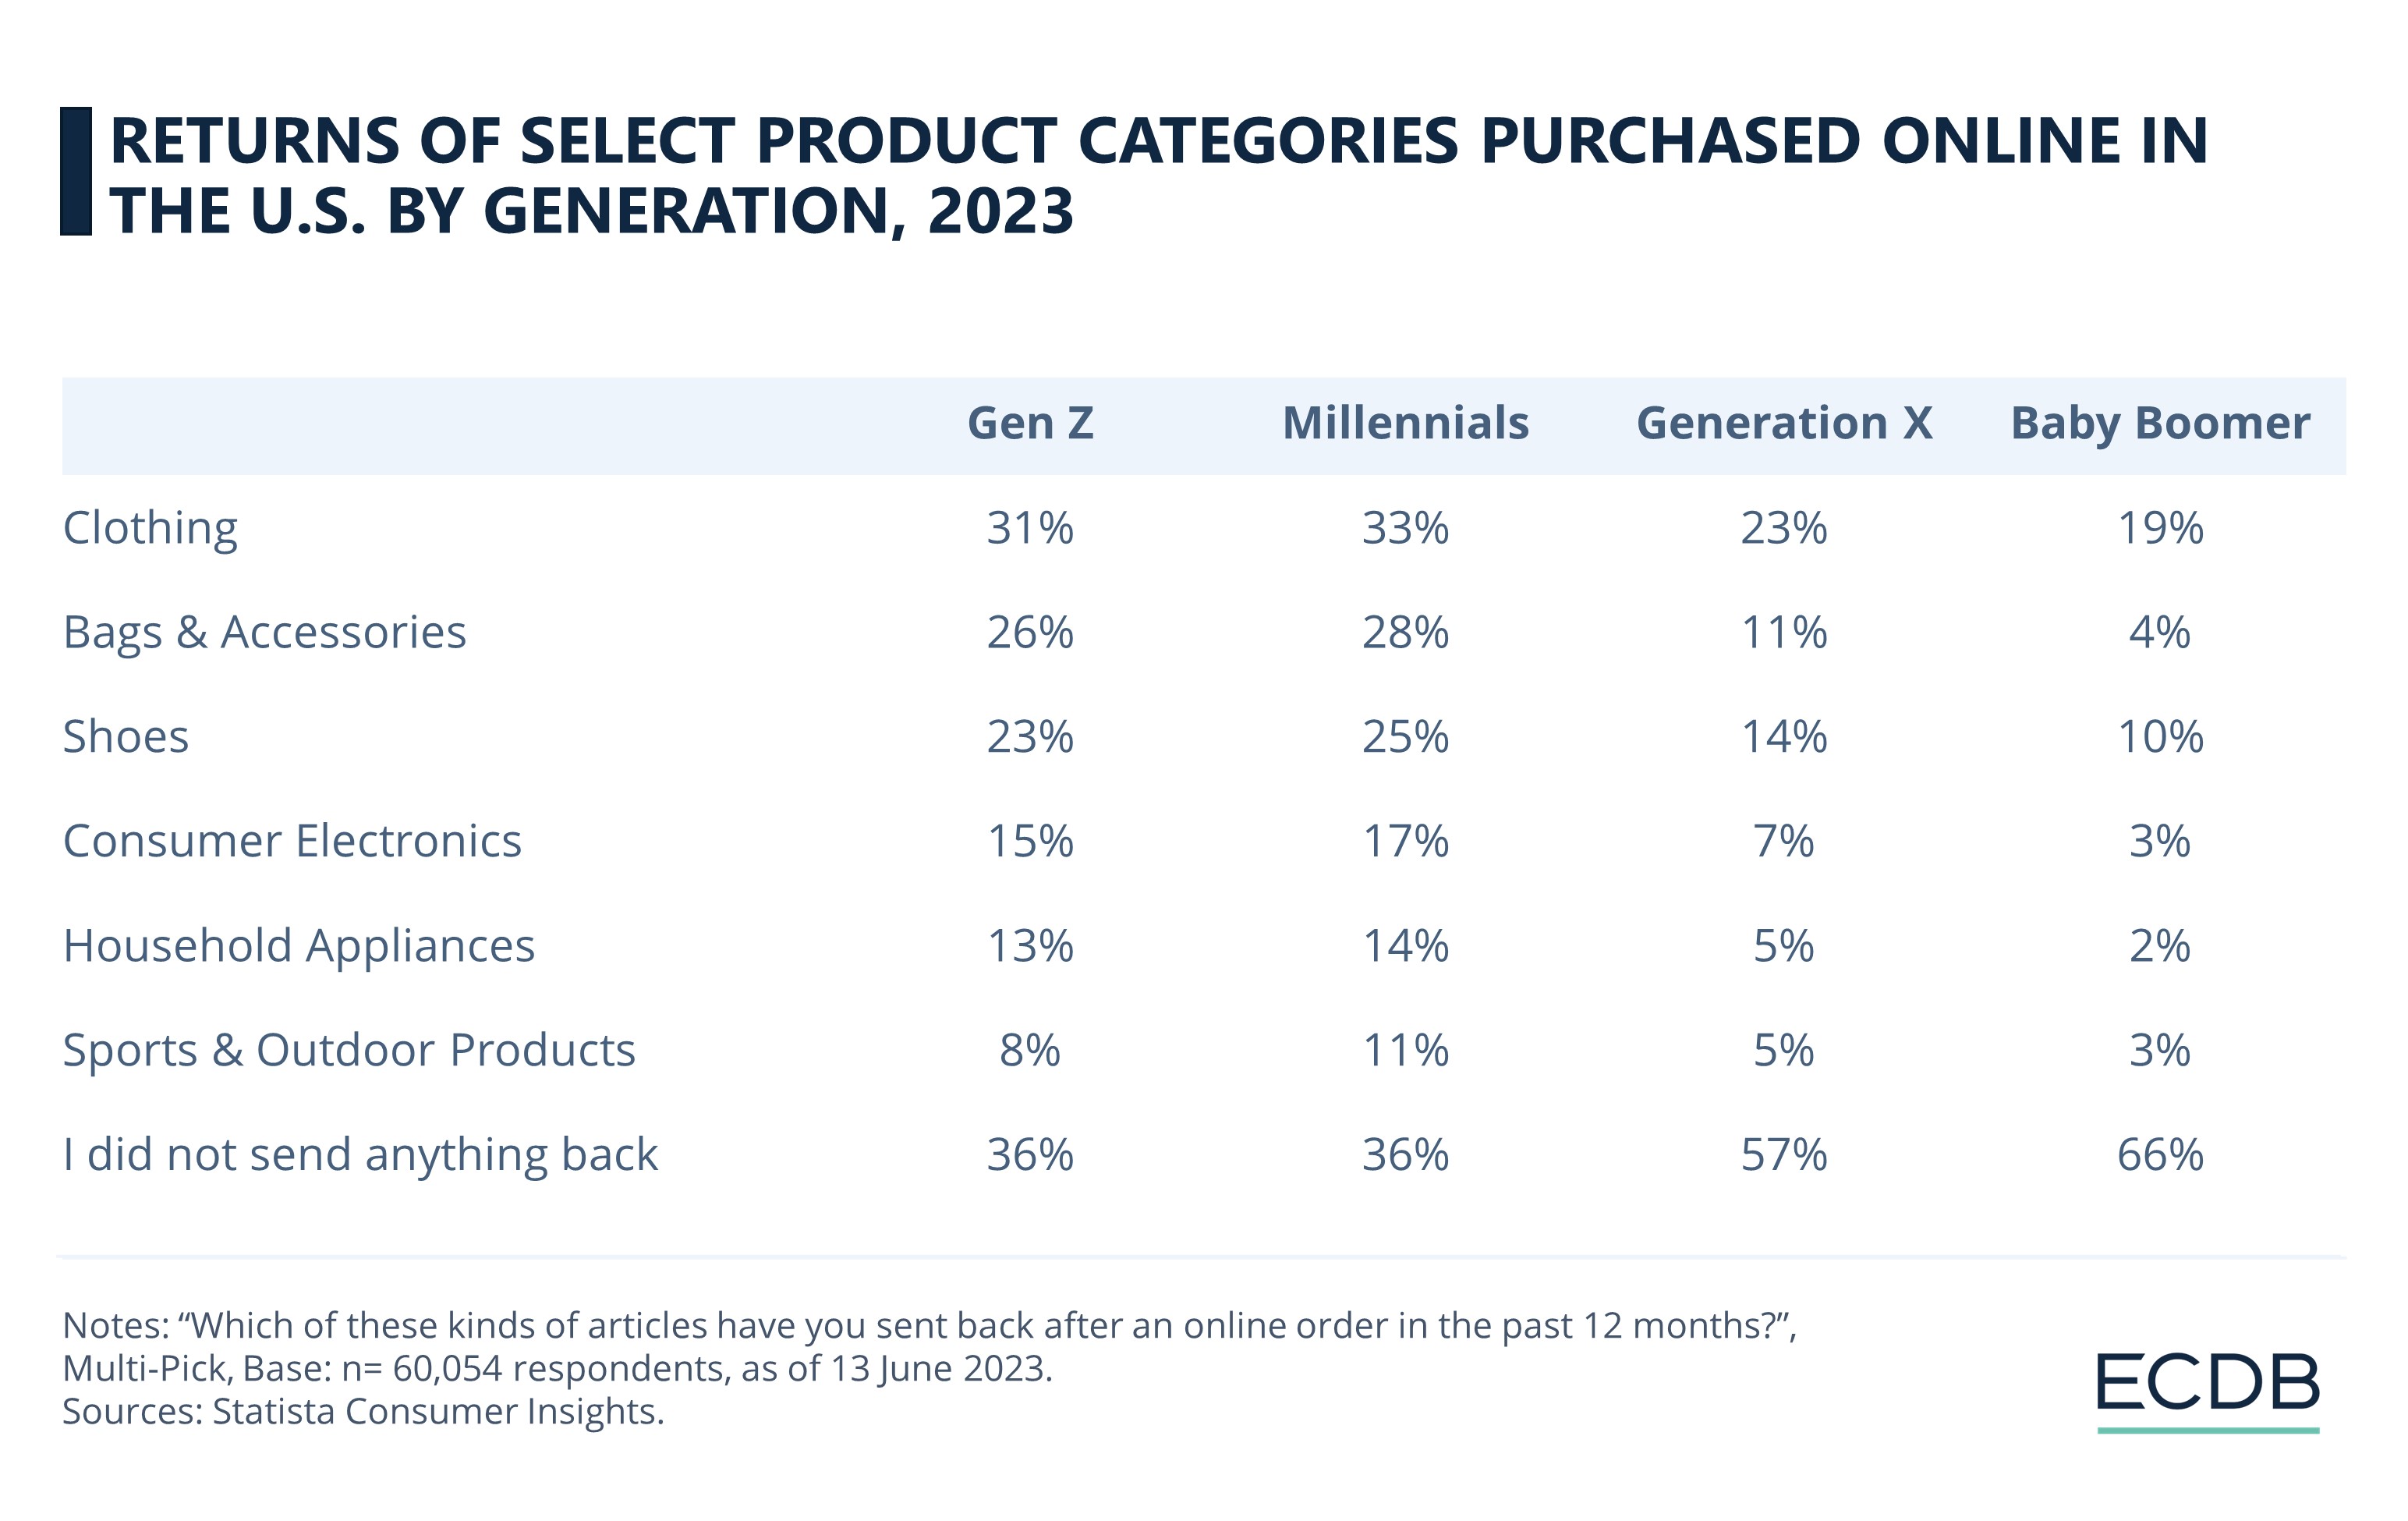 Returns of select product categories purchased online in the U.S., by generation 2023